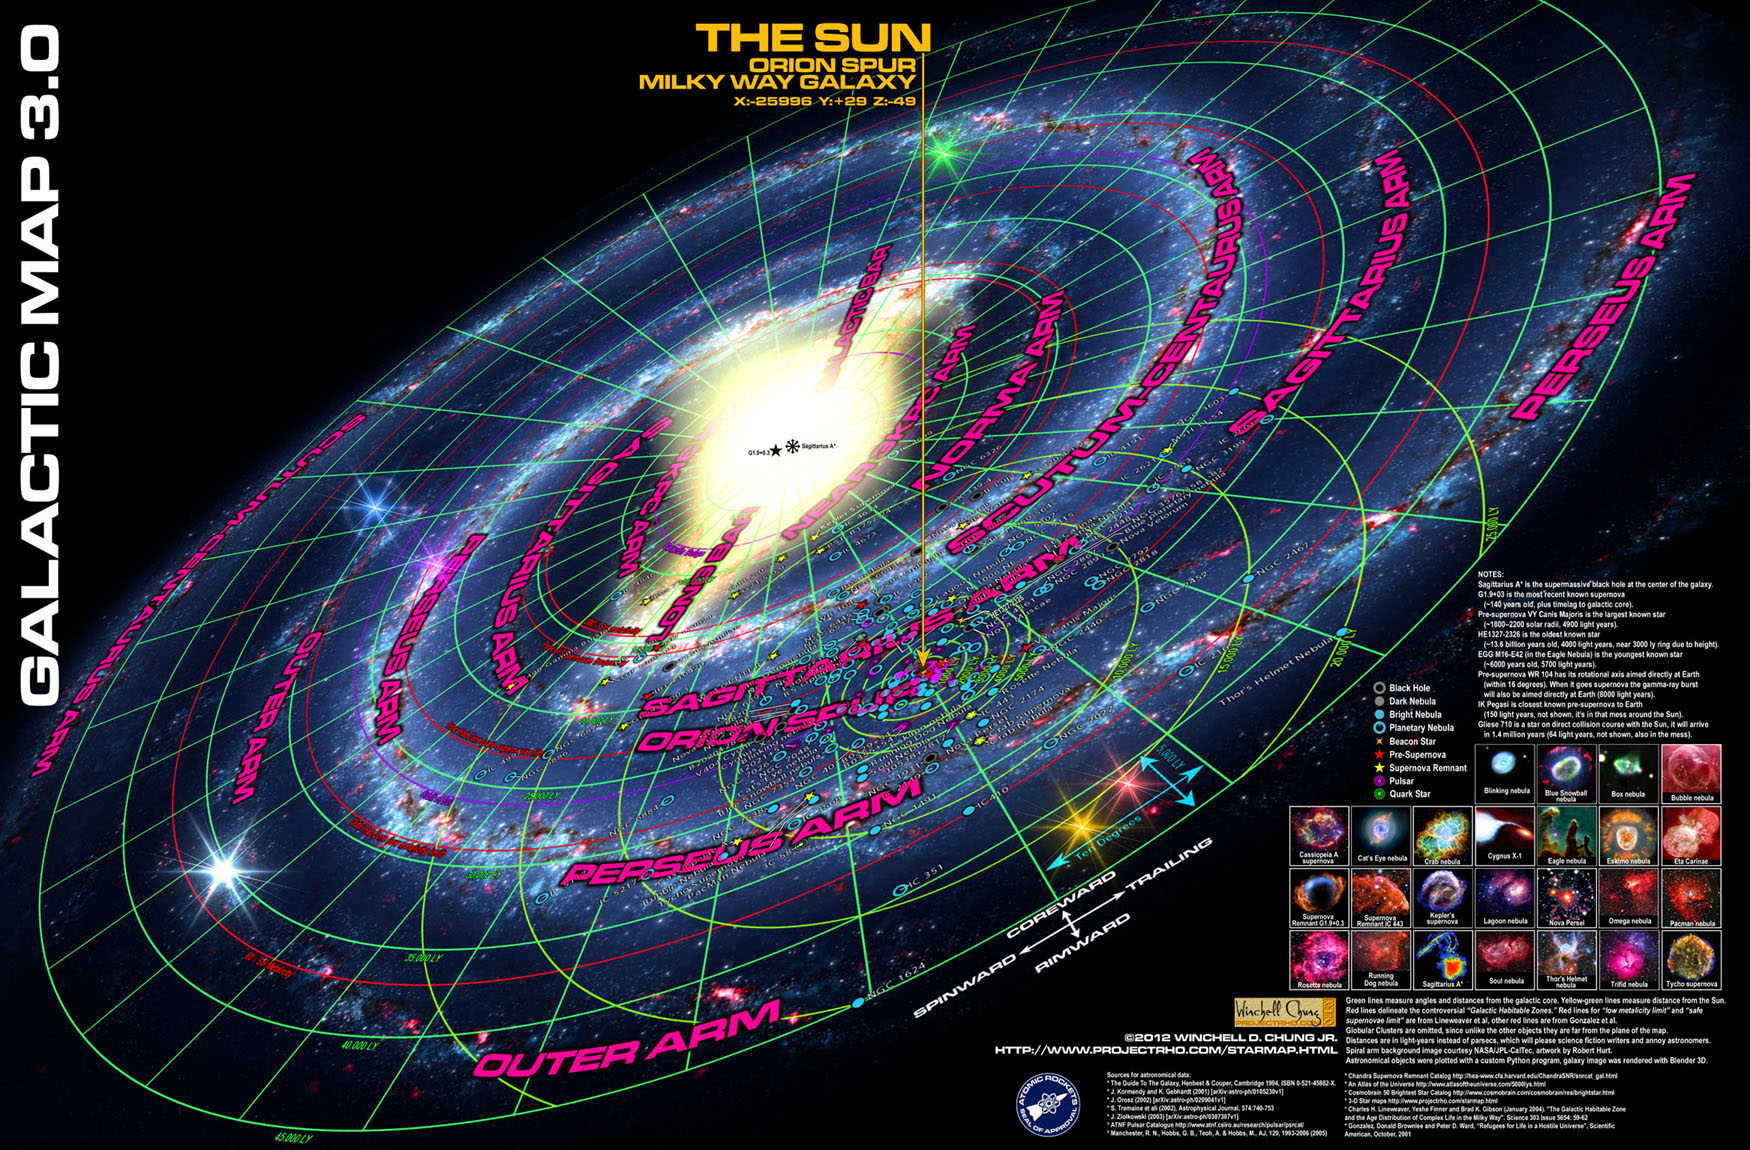 solar system with milky way map